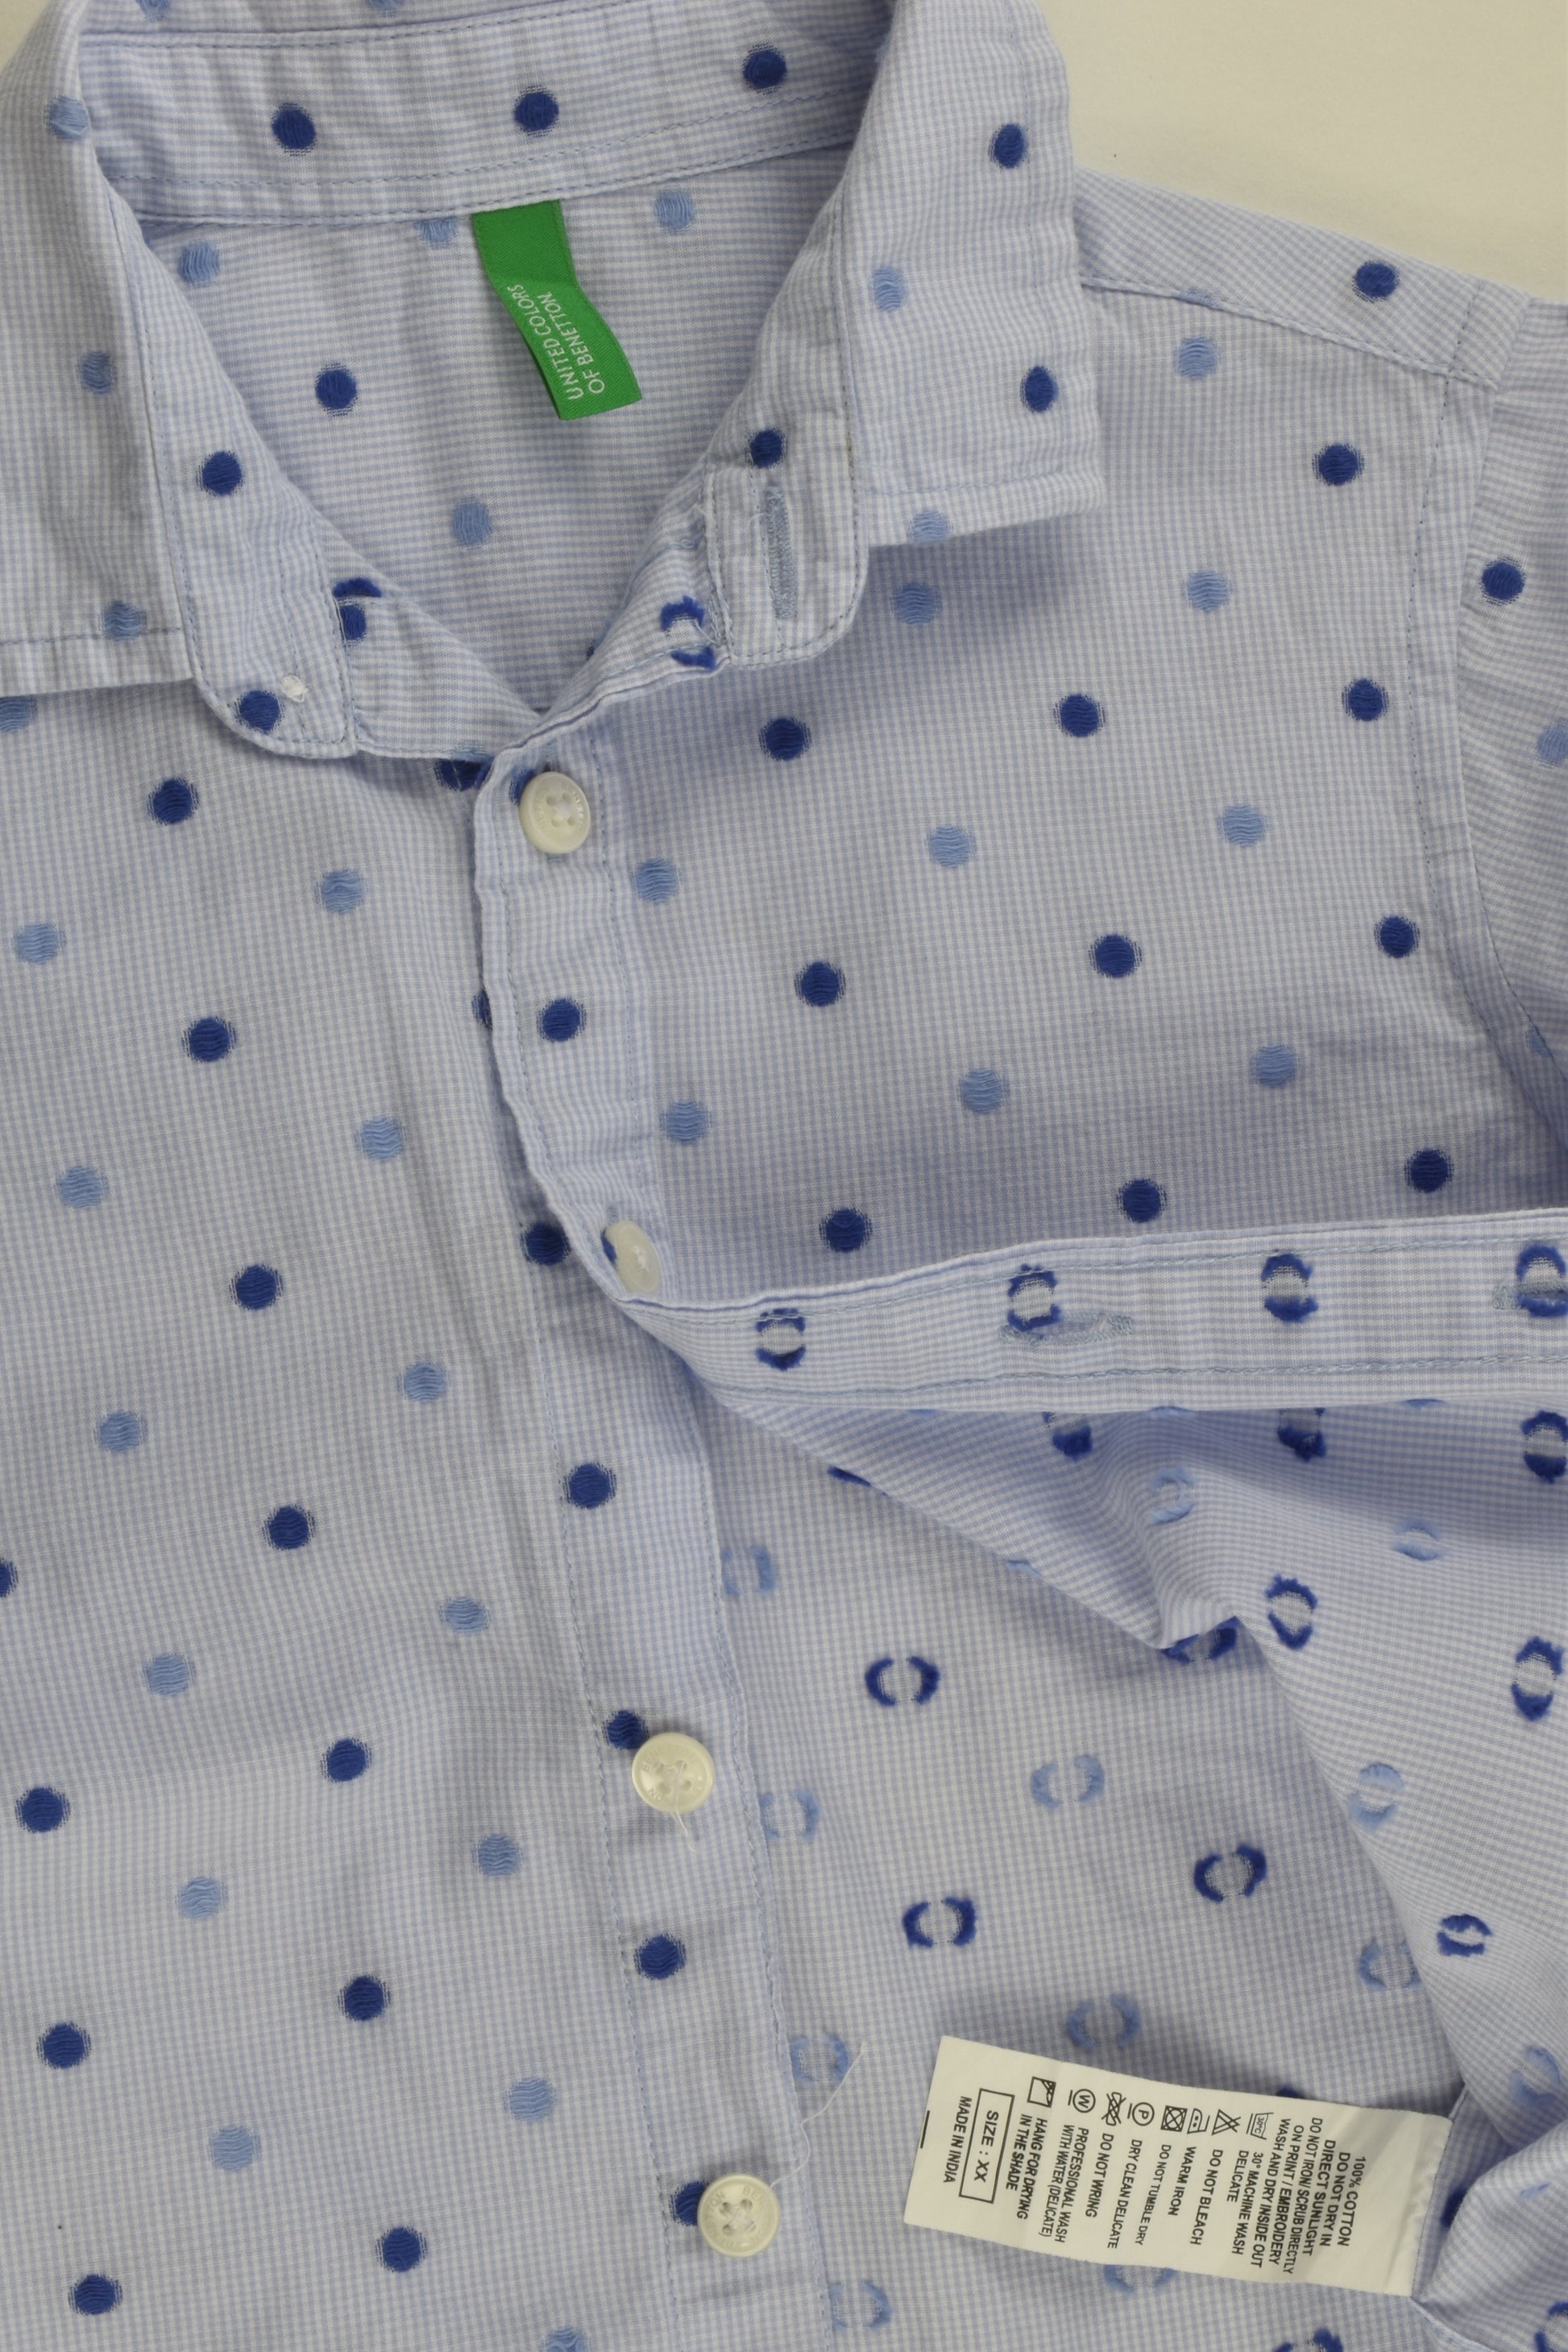 United Colors Of Benetton Size 4 Dots Shirt